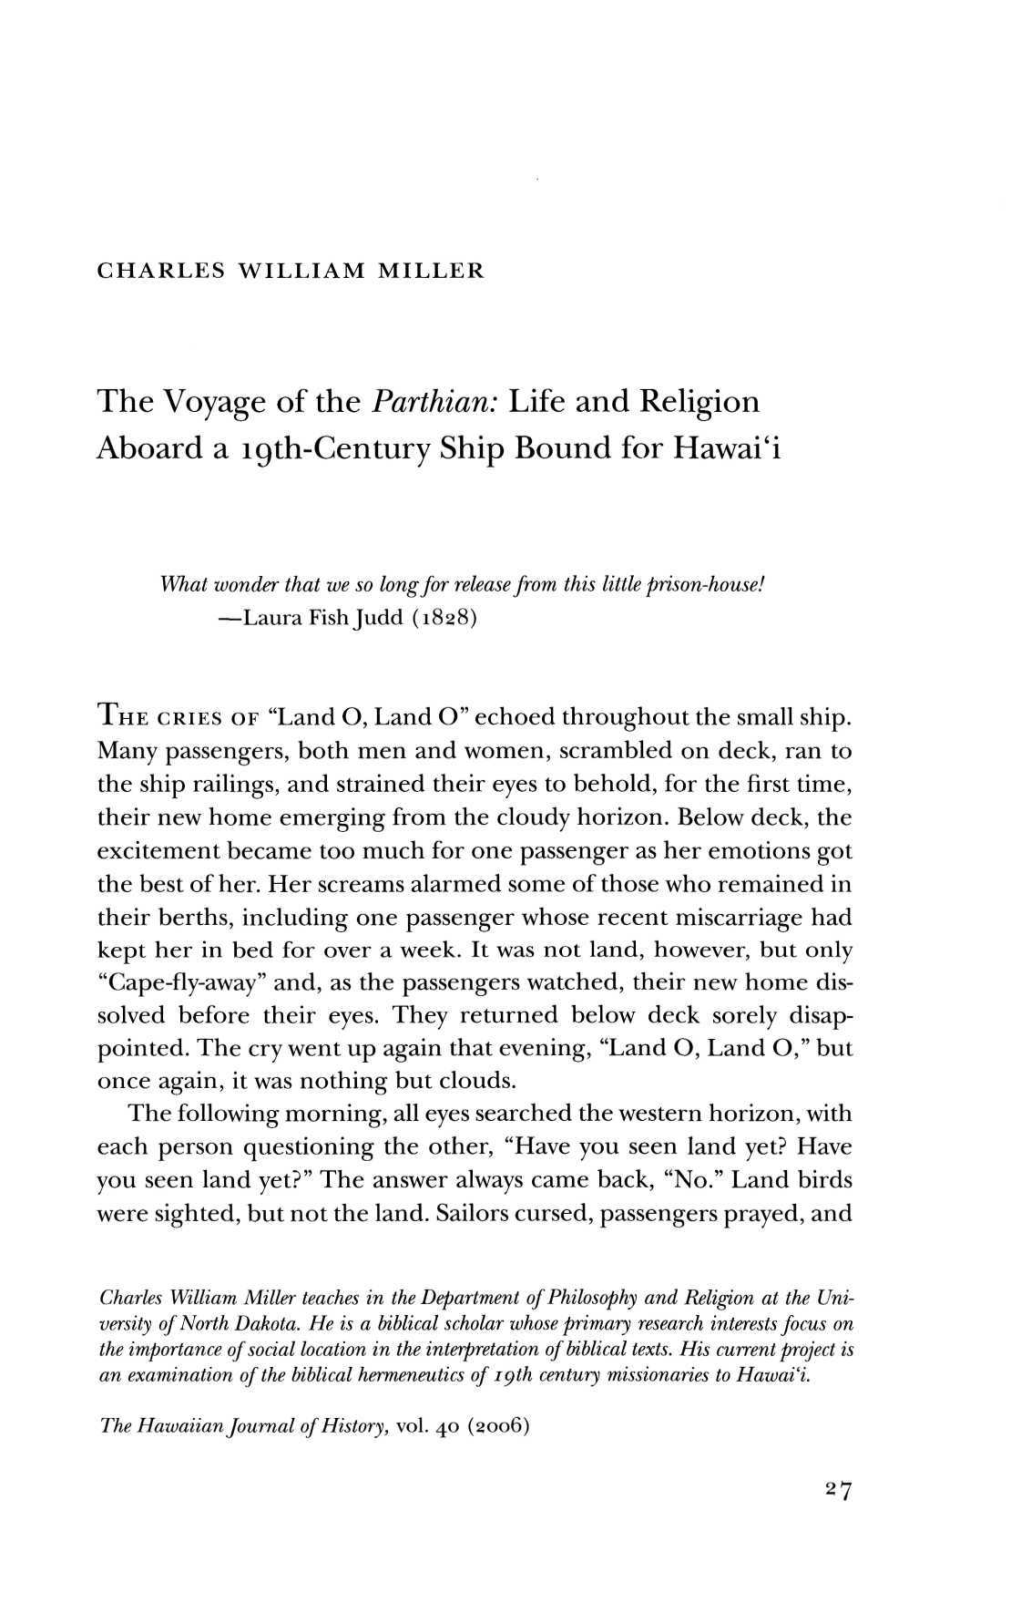 The Voyage of the Parthian: Life and Religion Aboard a 19Th-Century Ship Bound for Hawai'i